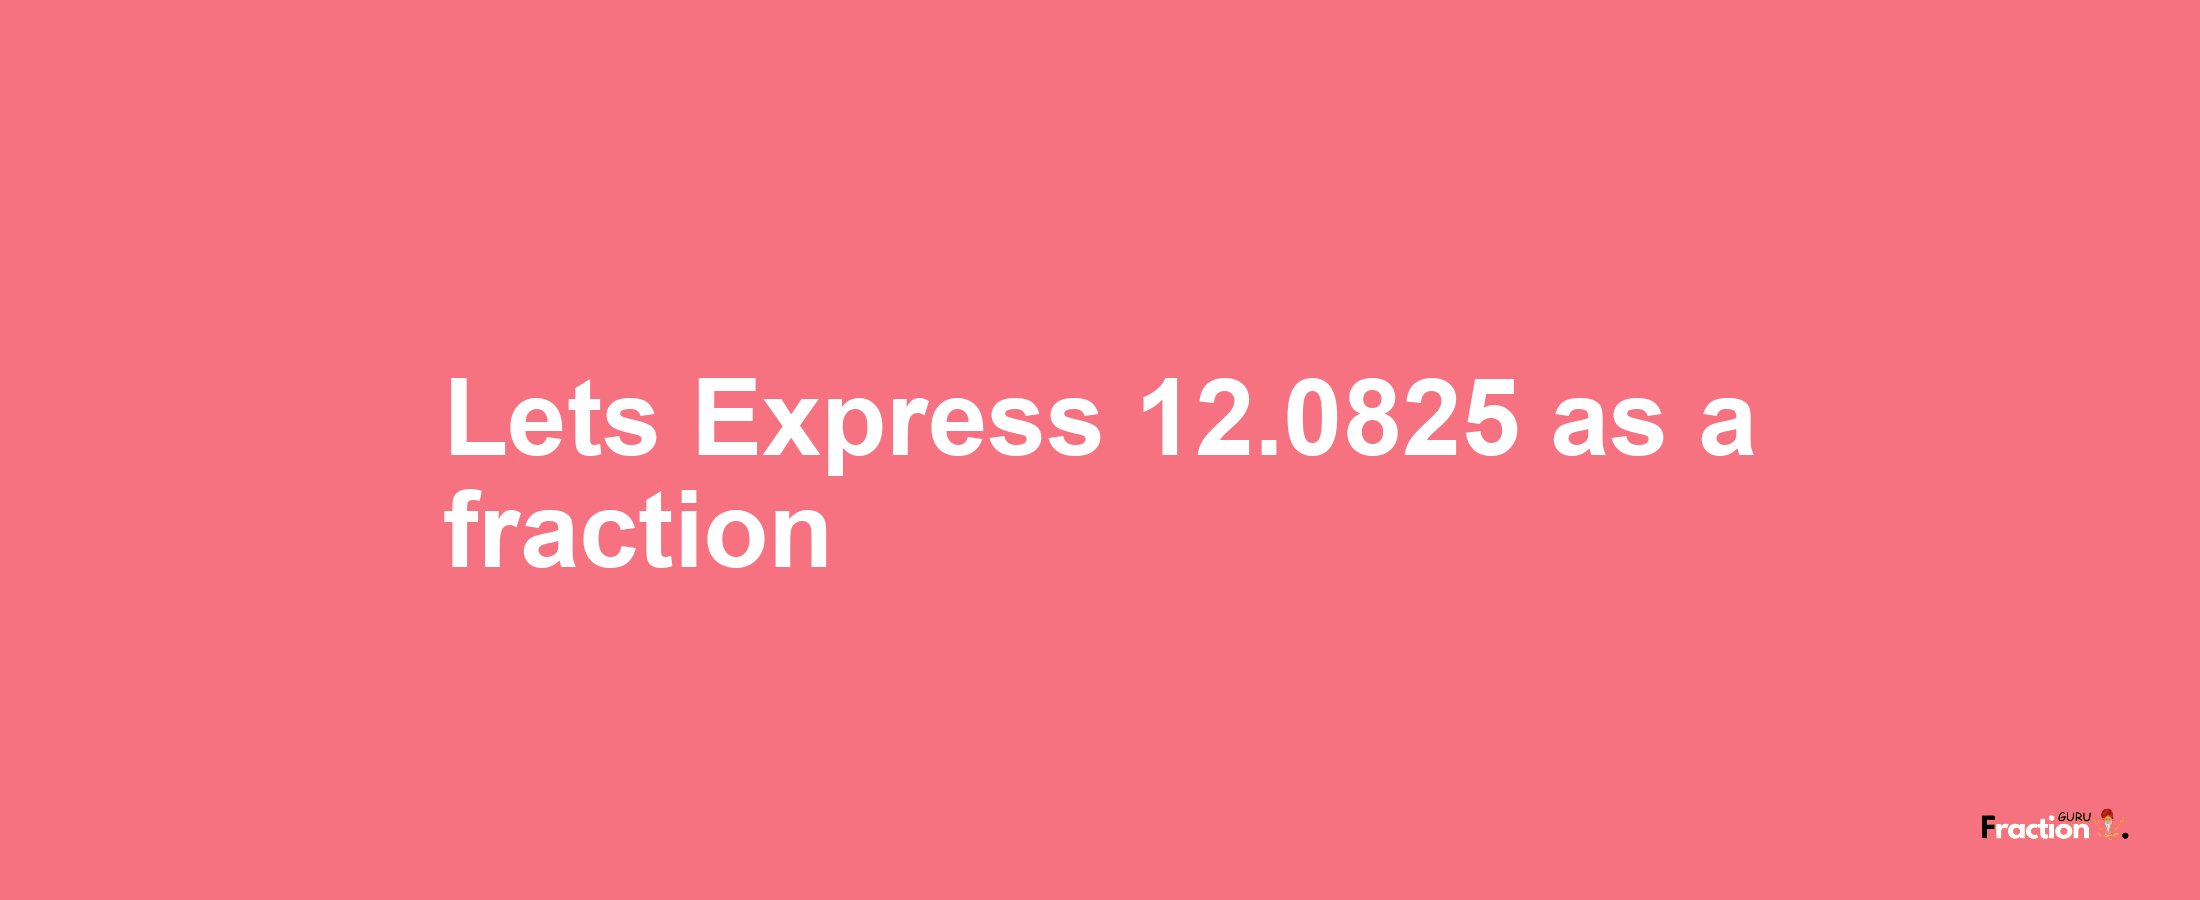 Lets Express 12.0825 as afraction